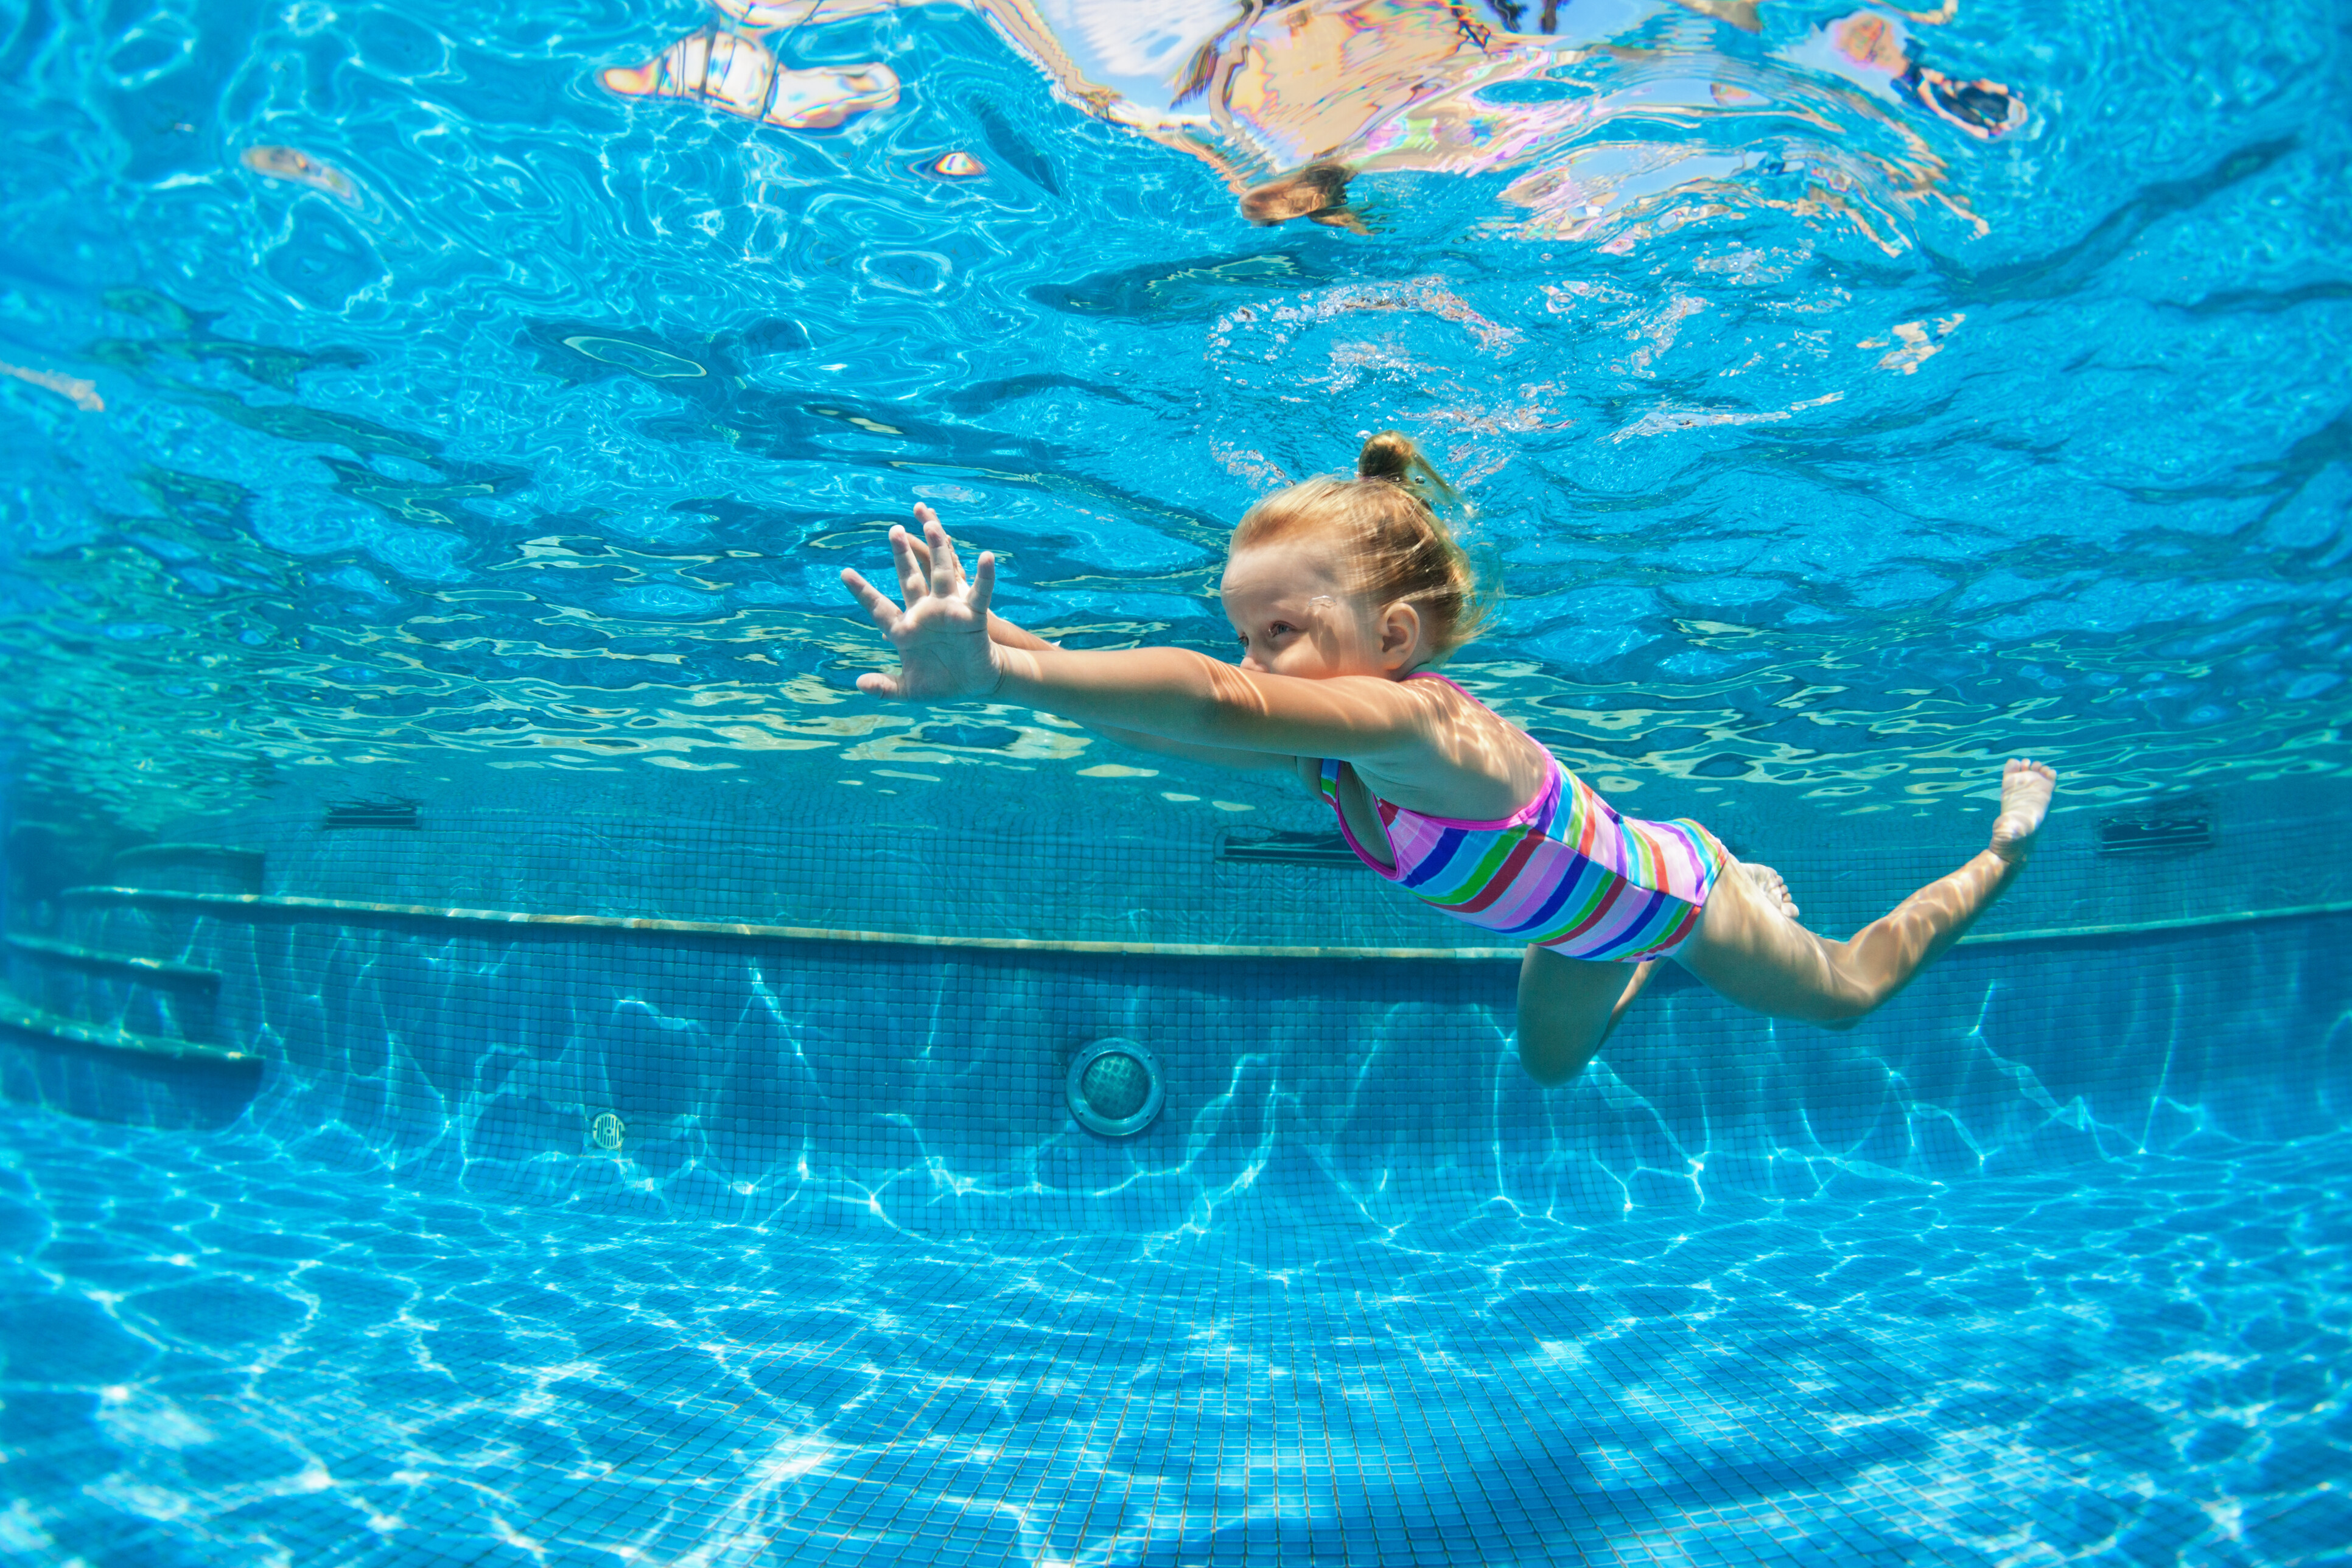 A child learns to swim, diving in a blue pool.